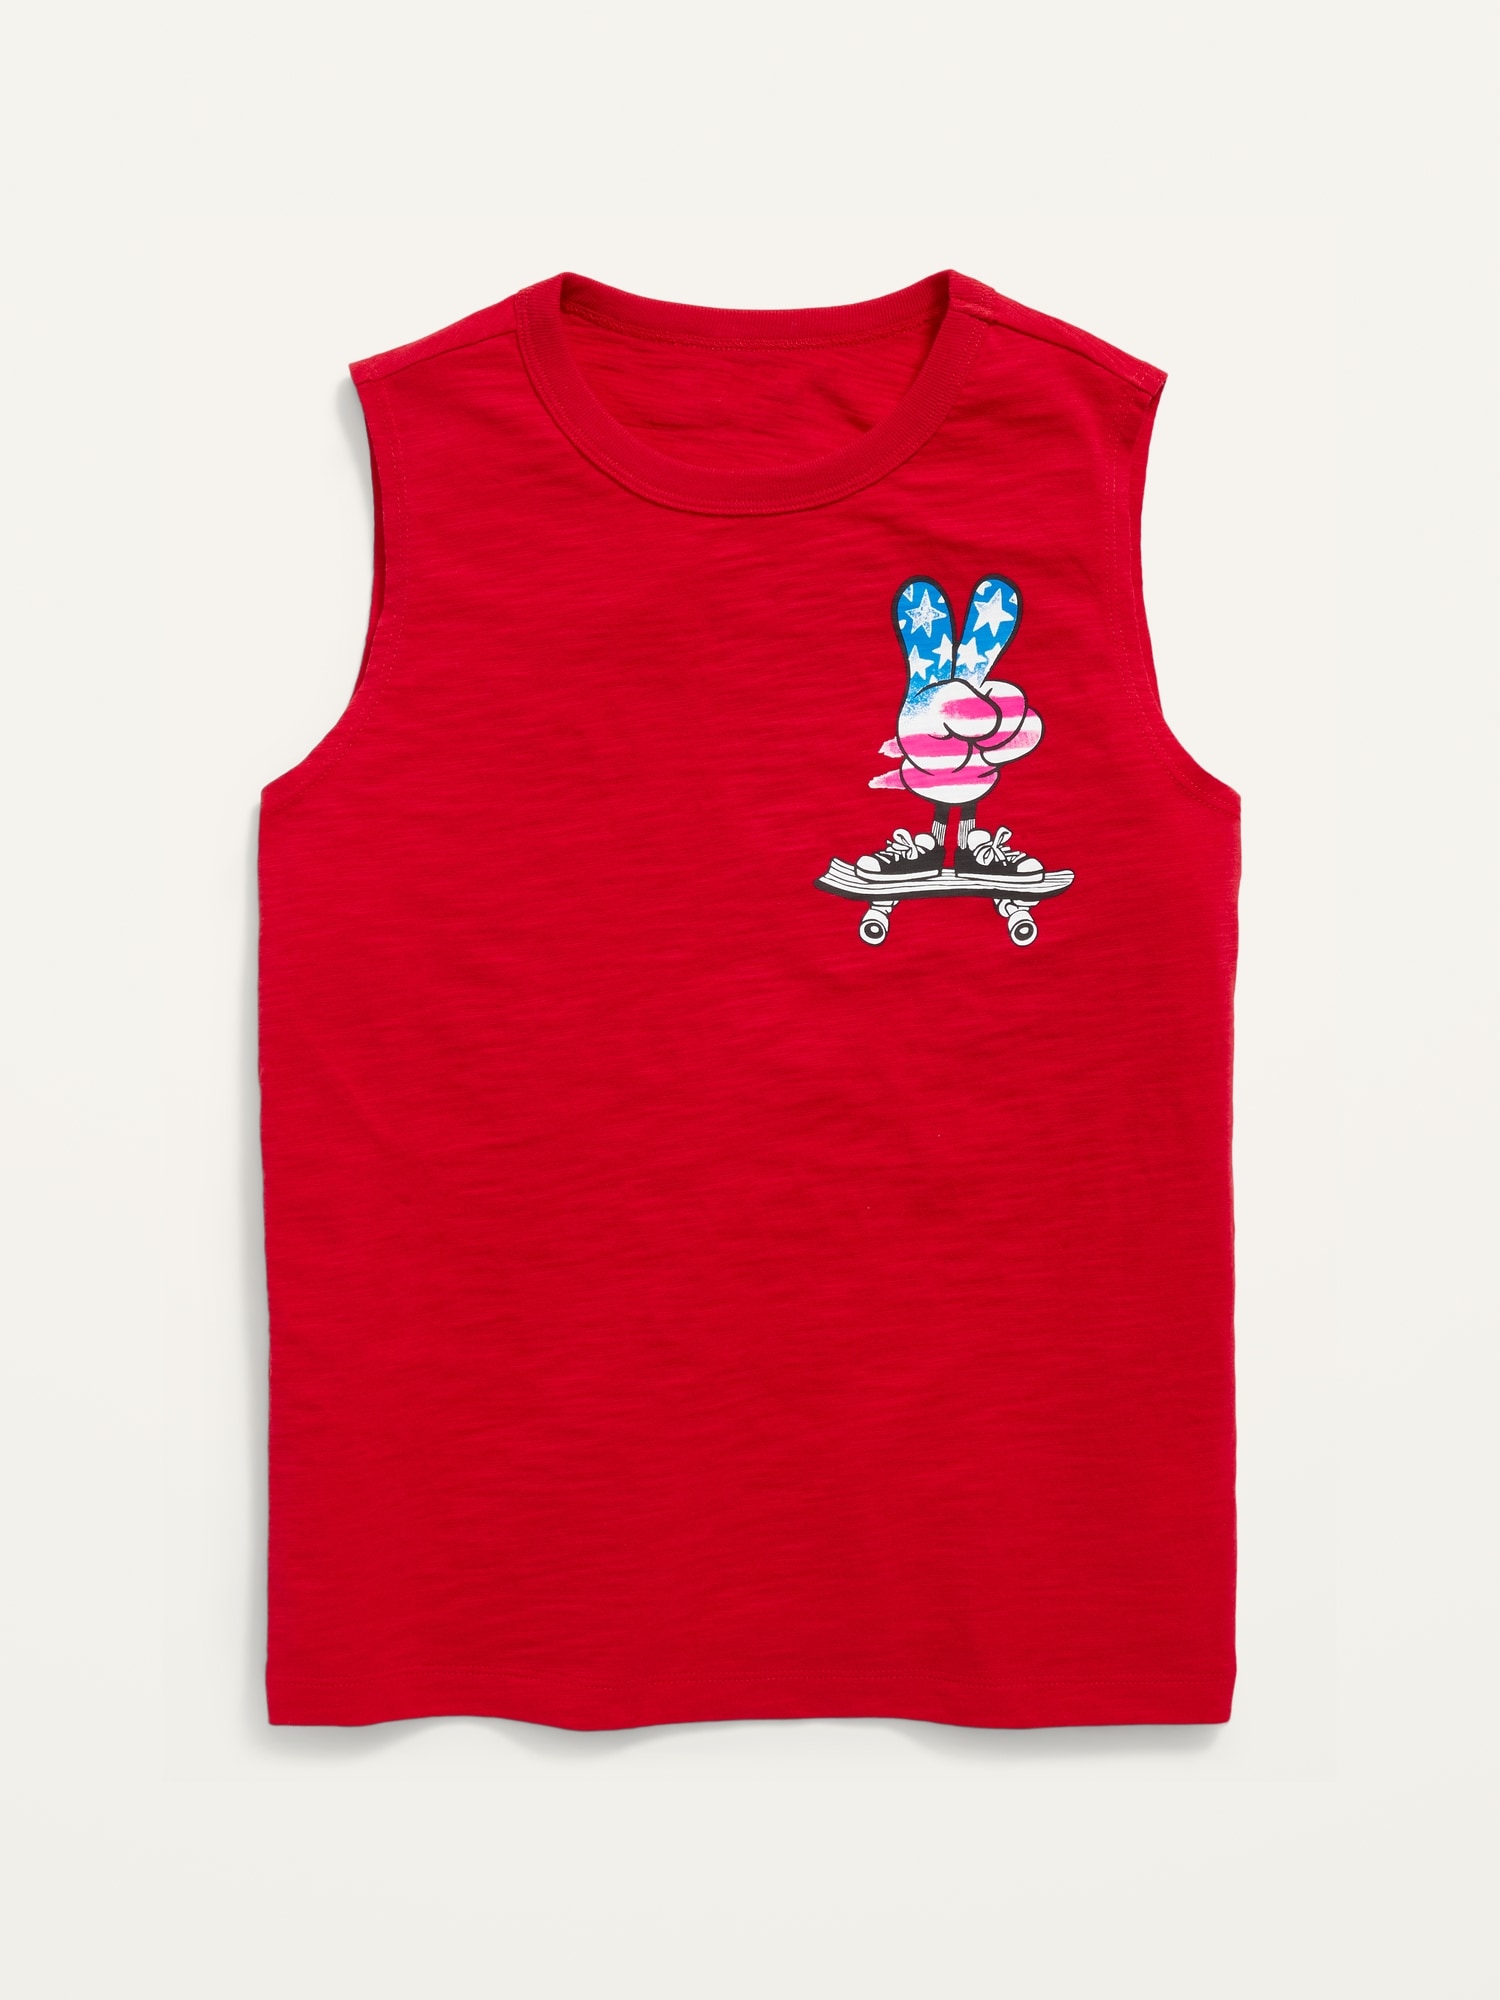 Americana Graphic Sleeveless Muscle T-Shirt for Boys